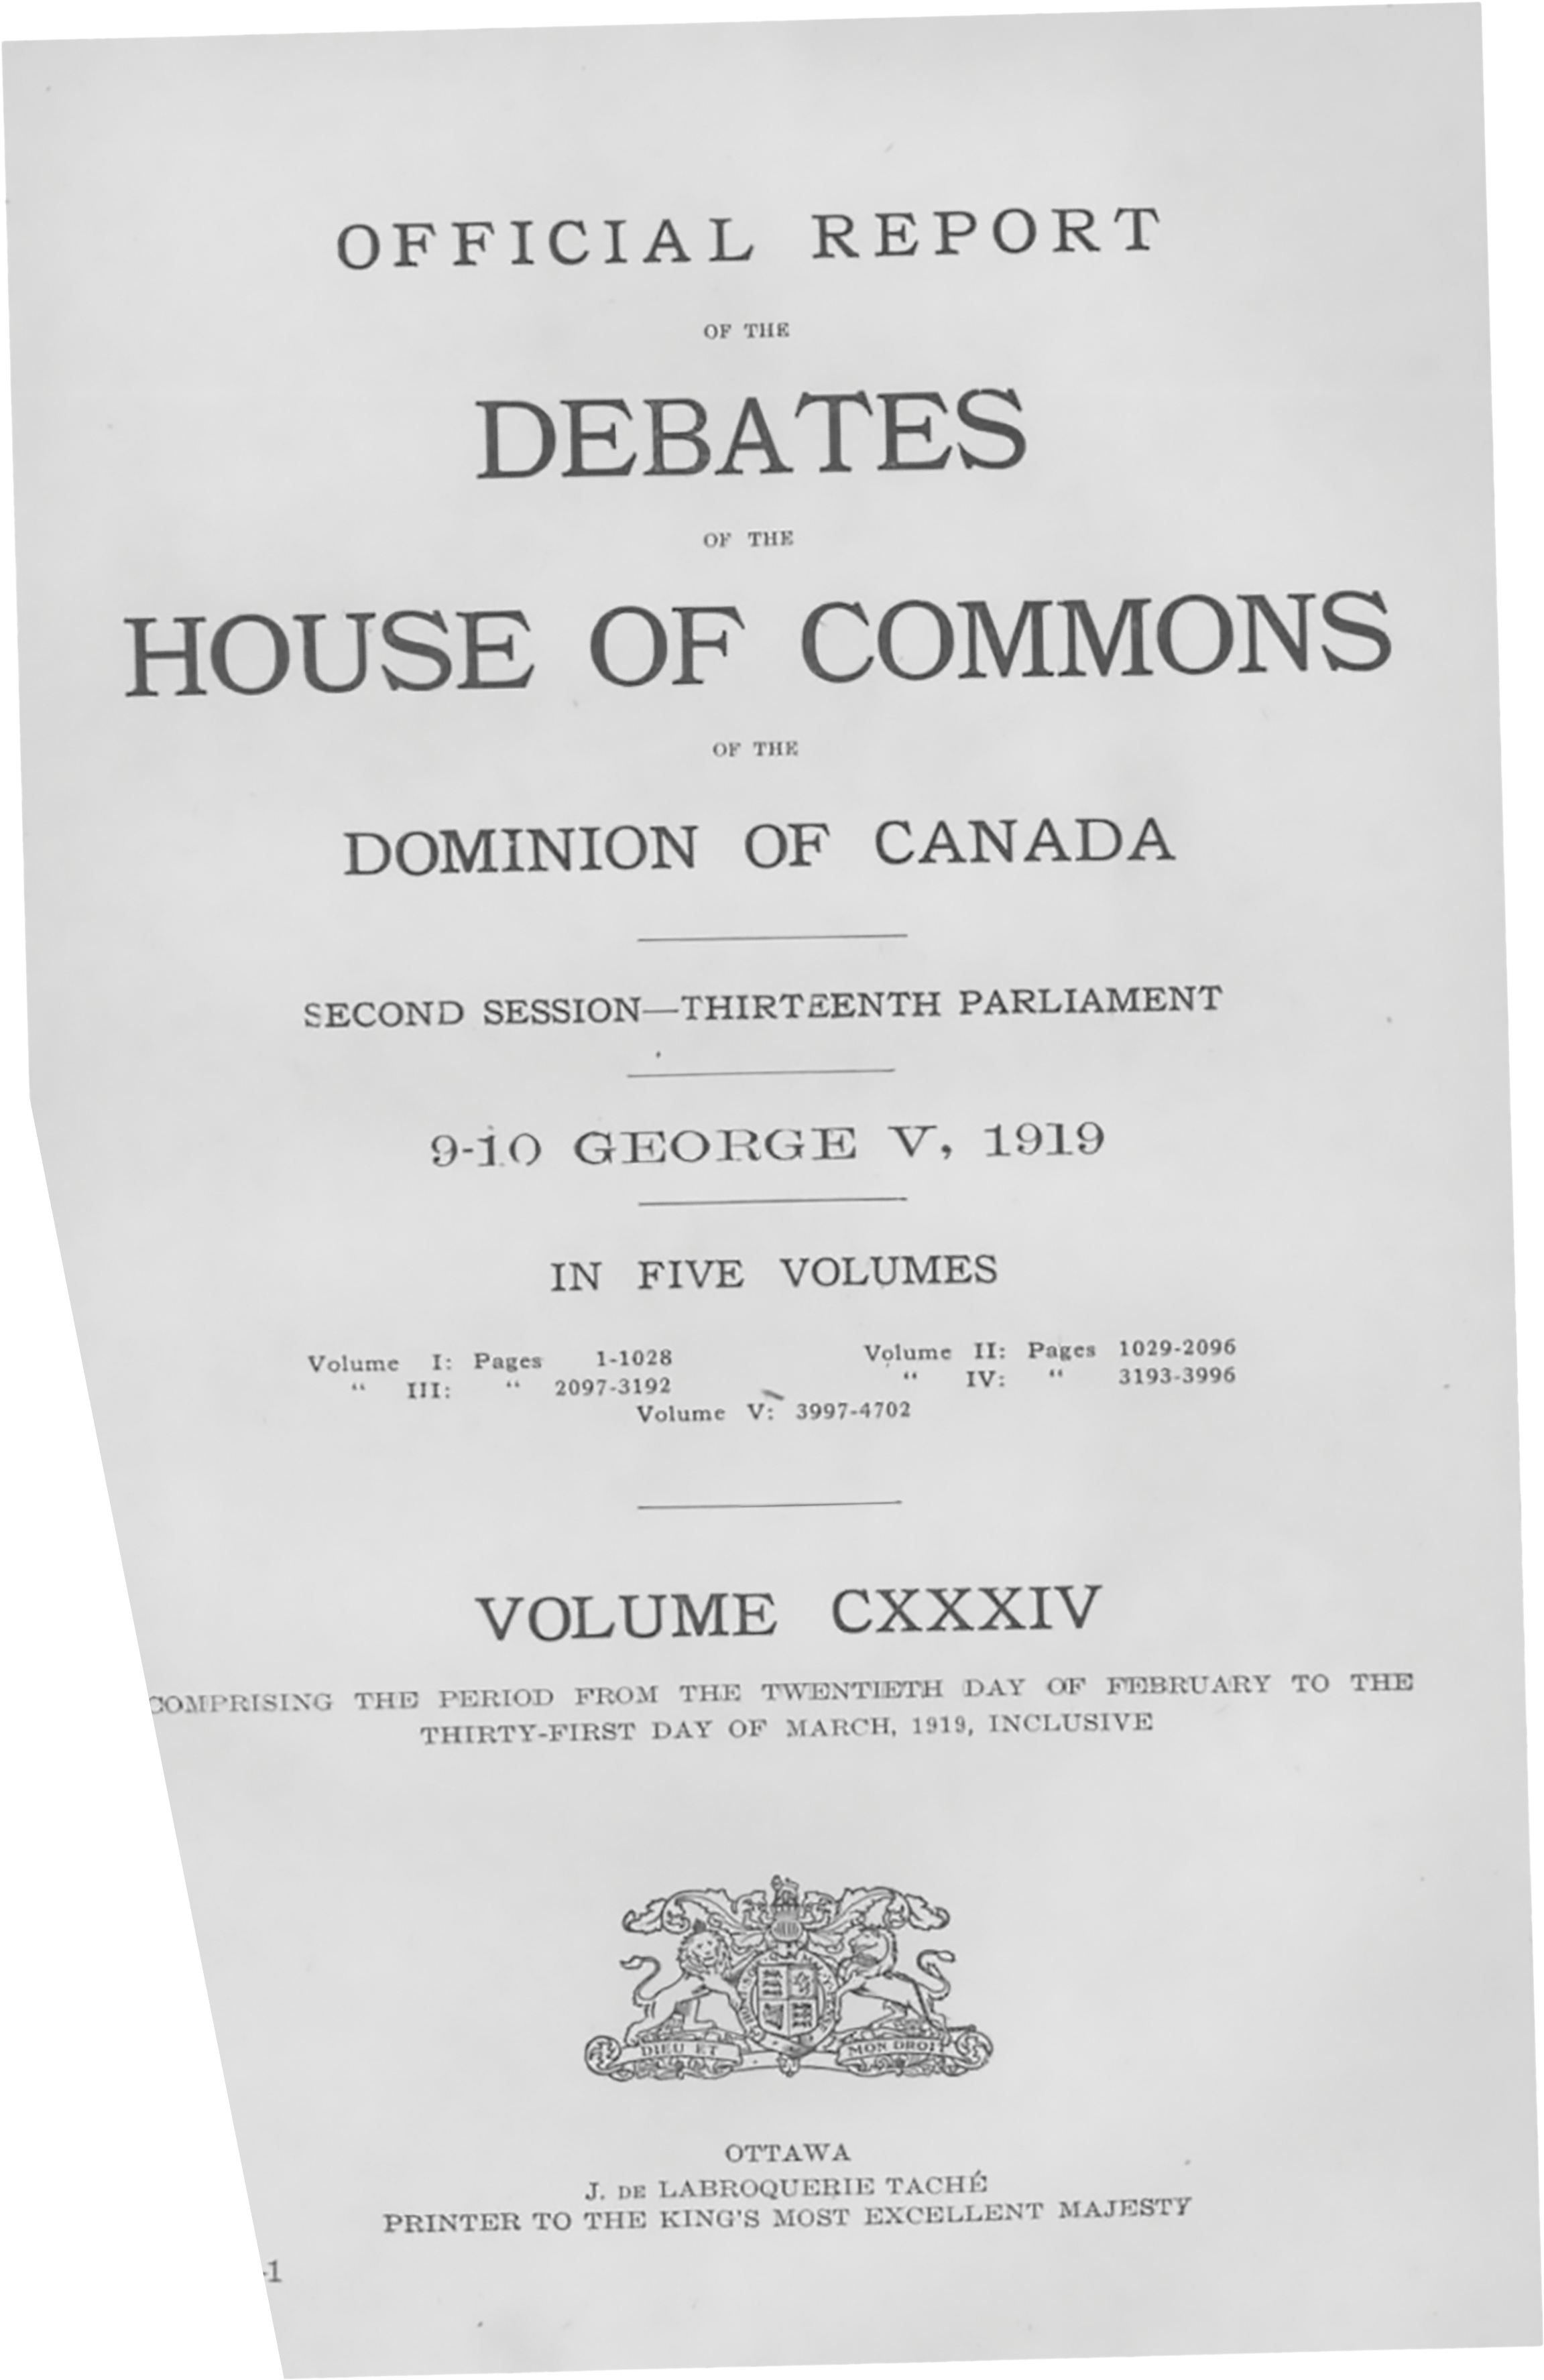 Debates of the House of Commons, 1919